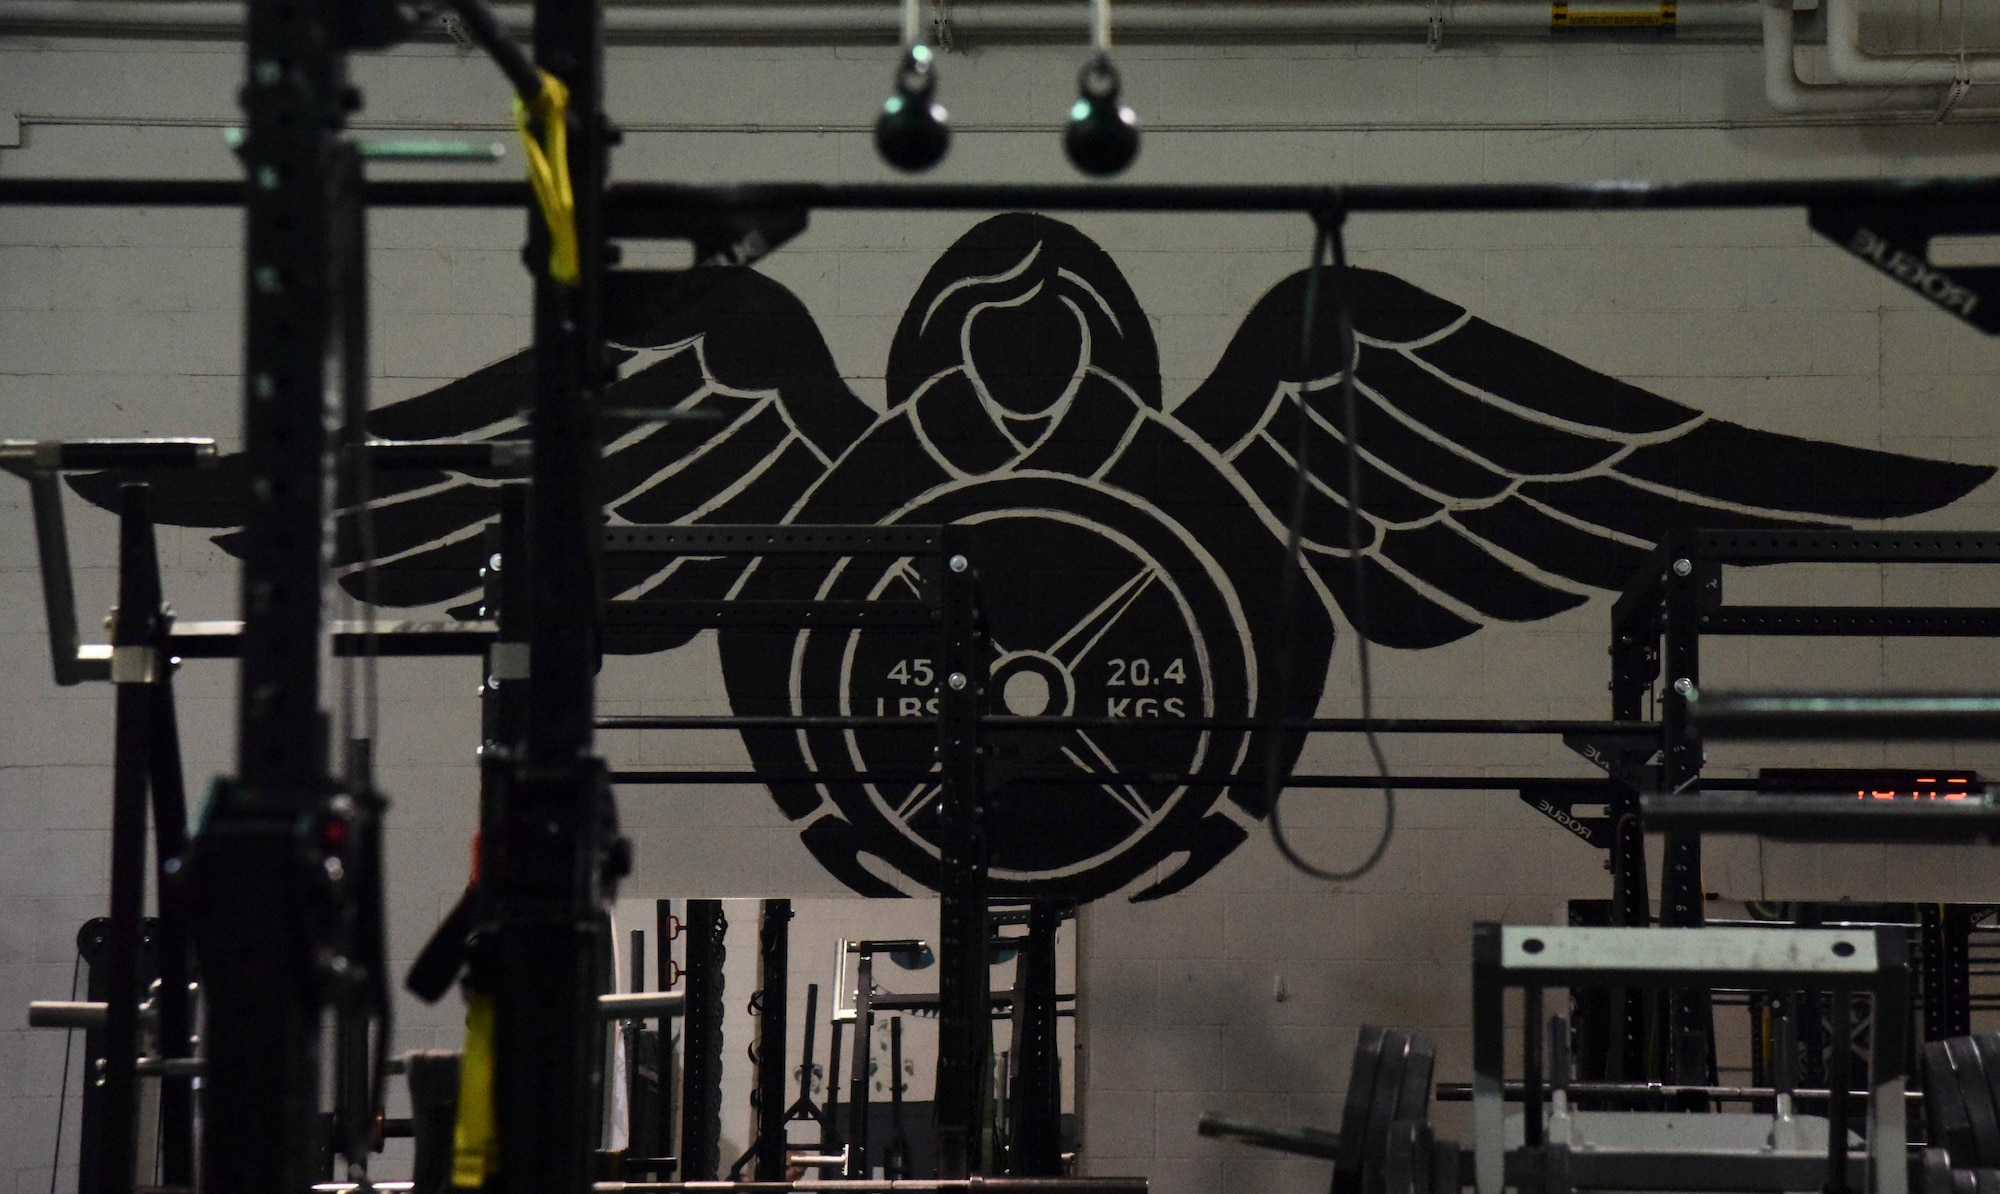 Pictured above is a rescue logo painted onto a gym wall.